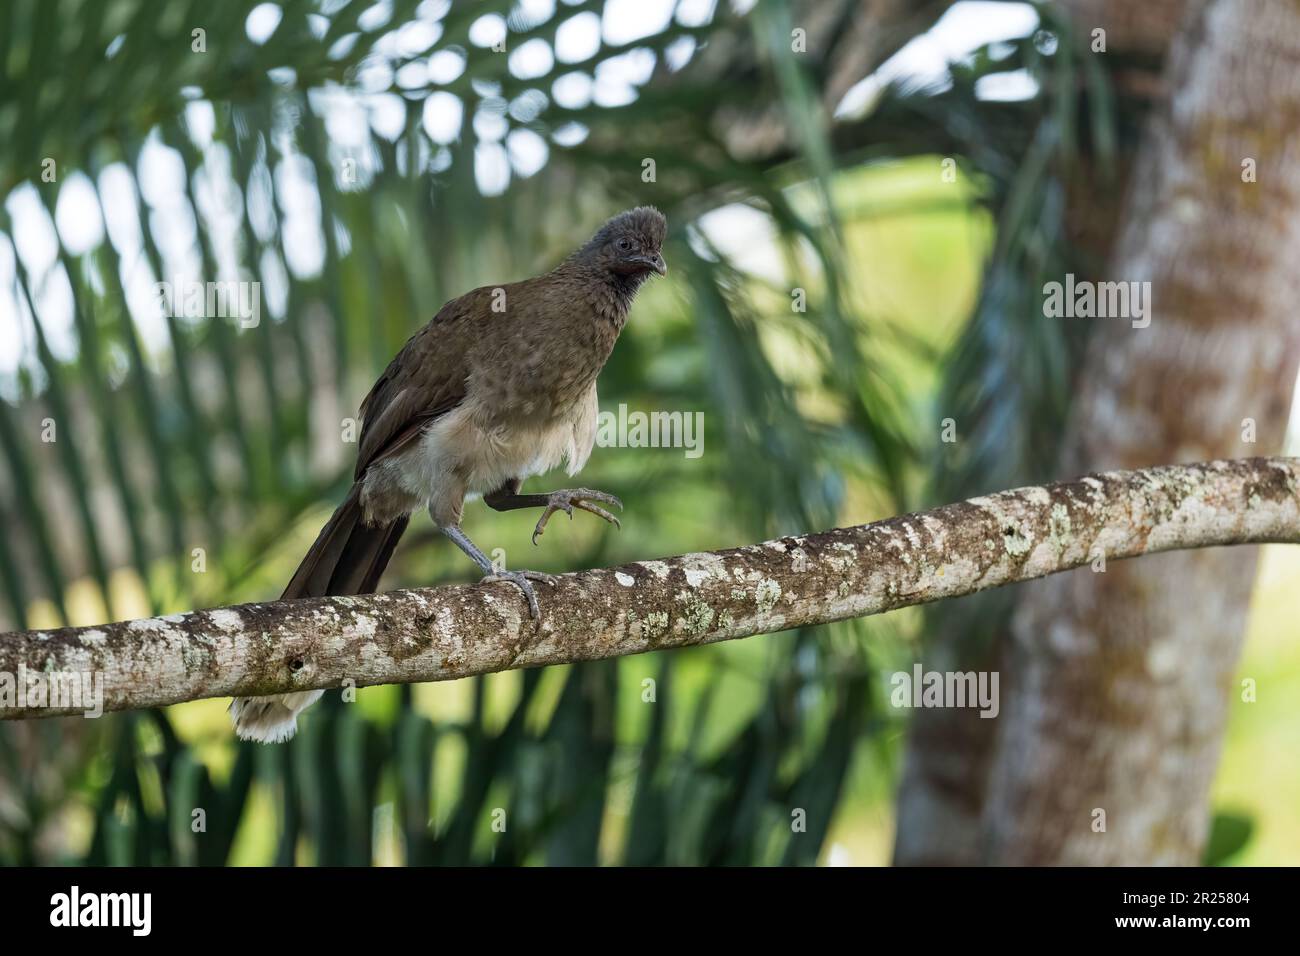 Grey-headed Chachalaca - Ortalis cinereiceps, special ancient bird from Central and Latin America woodlands and forests, Volcán, Panama. Stock Photo